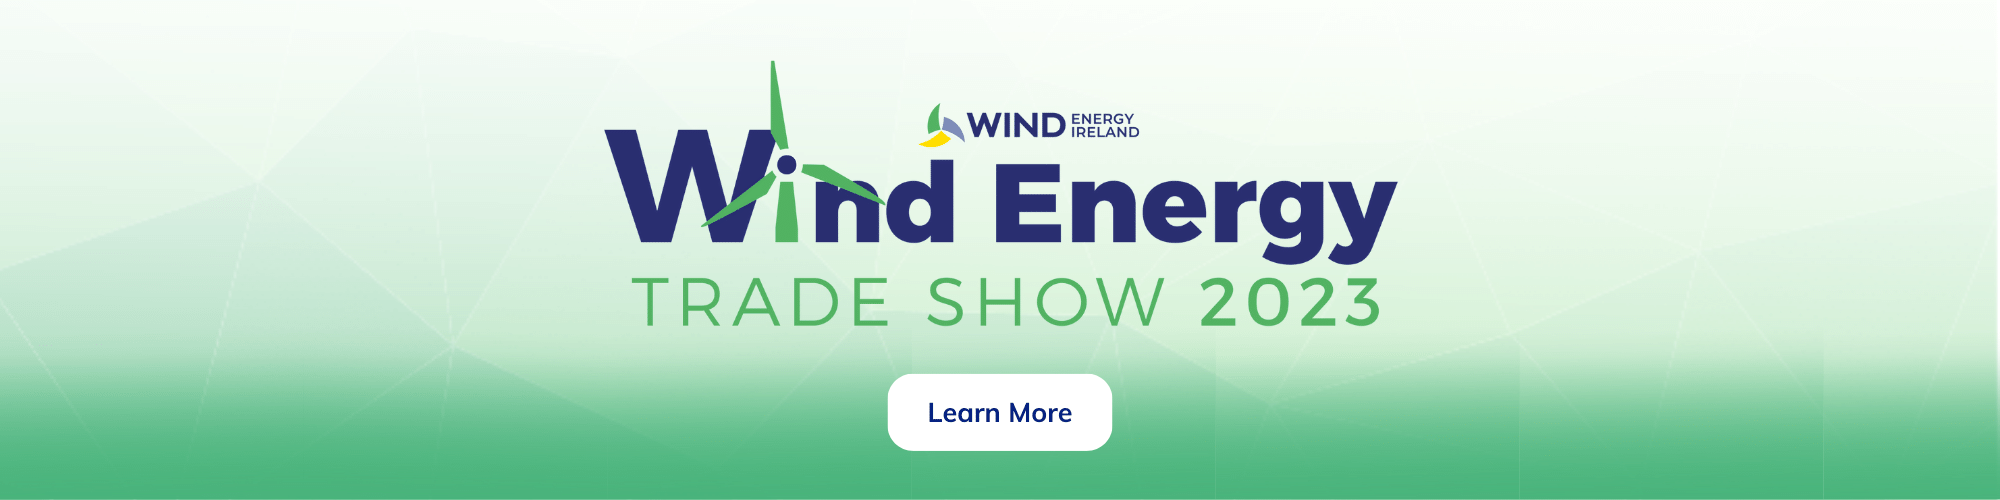 2023 Wind Energy Trade Show 